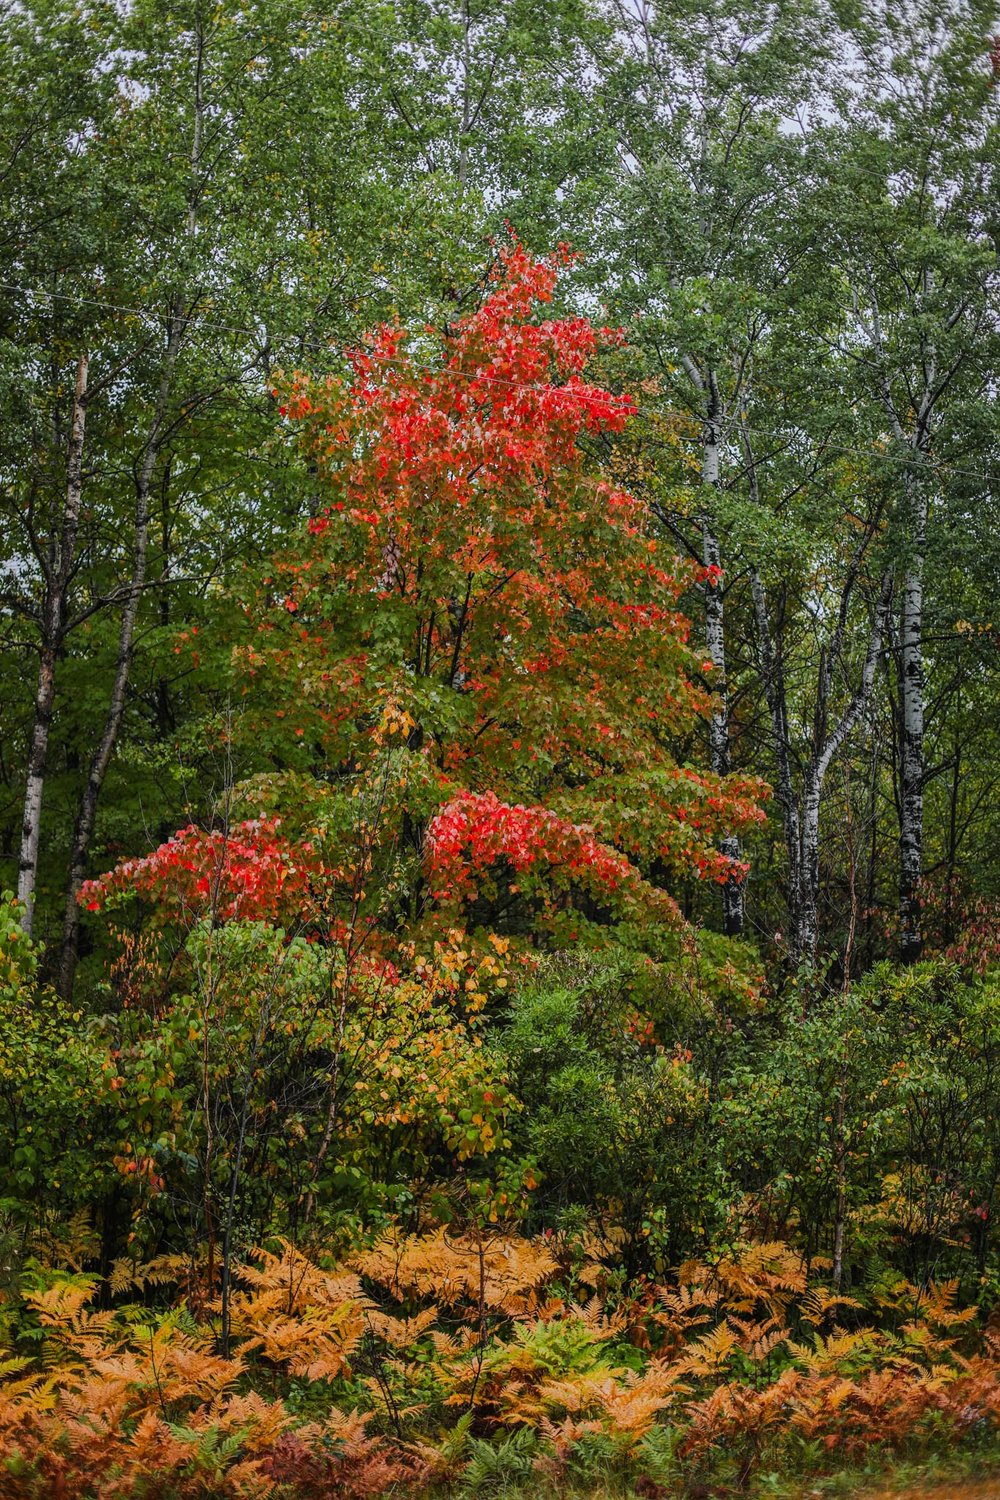 Autumn trees in Northern Wisconsin